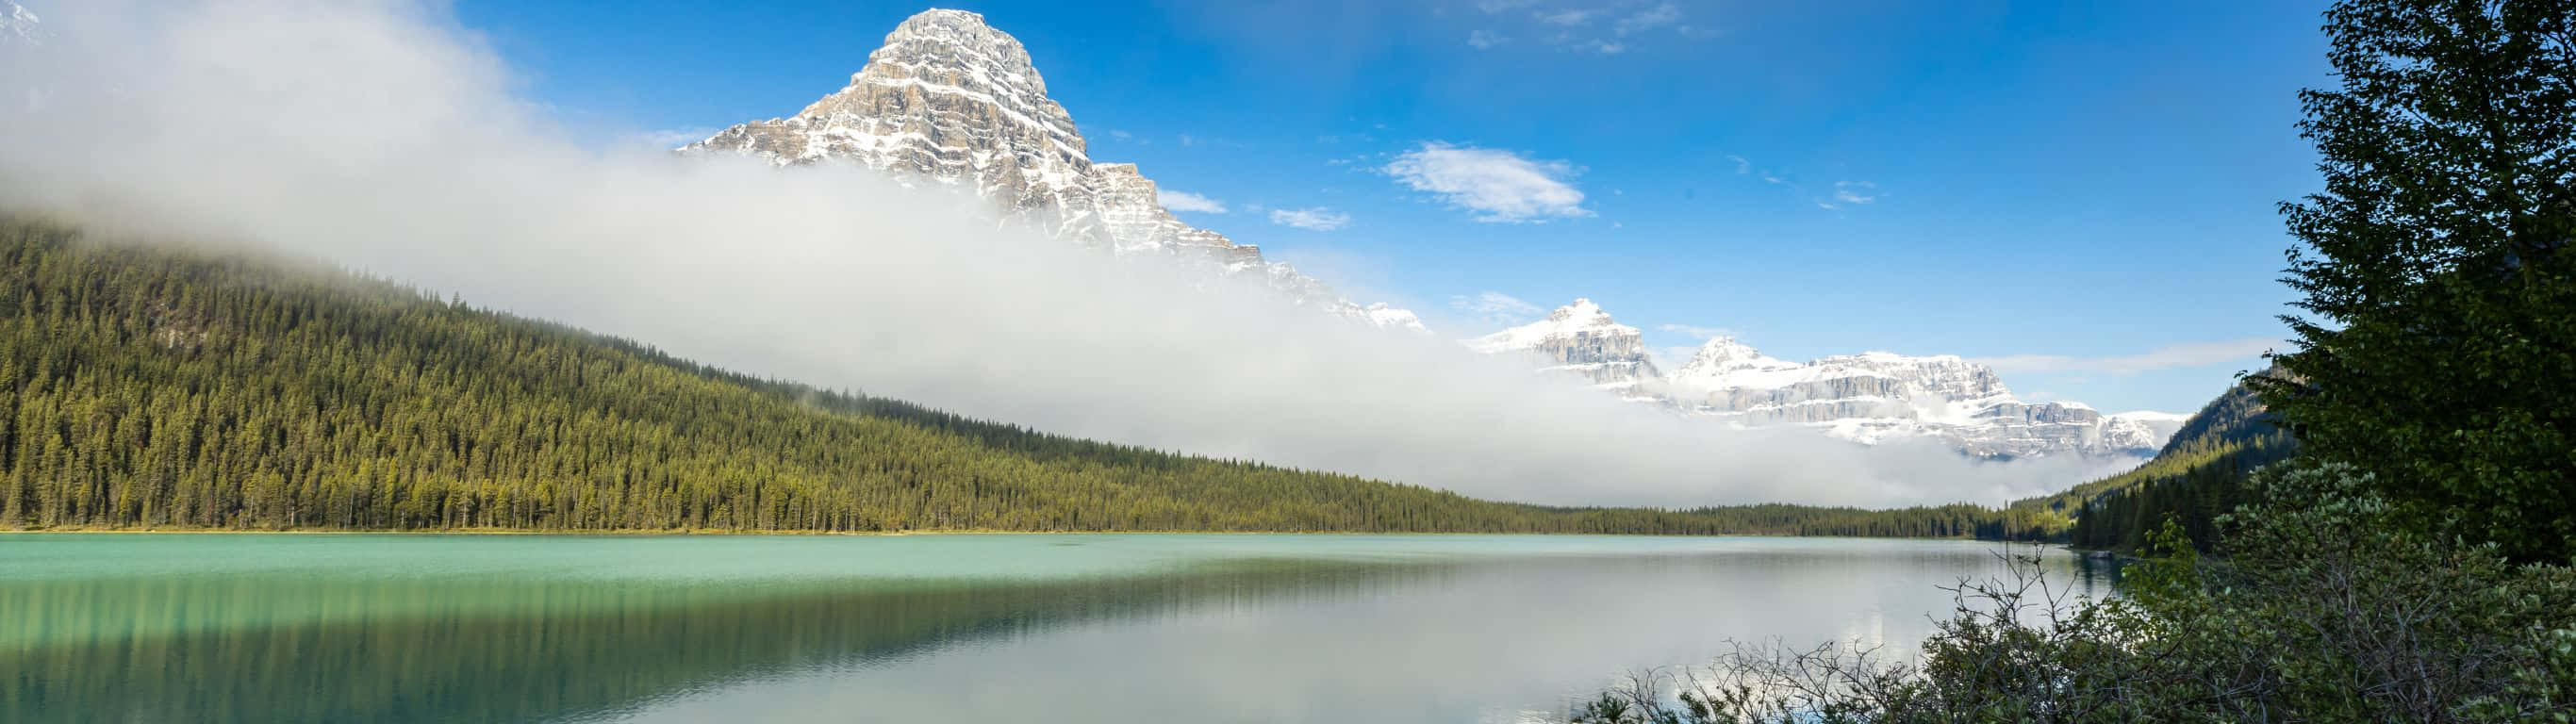 A Mountain Reflected In A Lake With Clouds Wallpaper